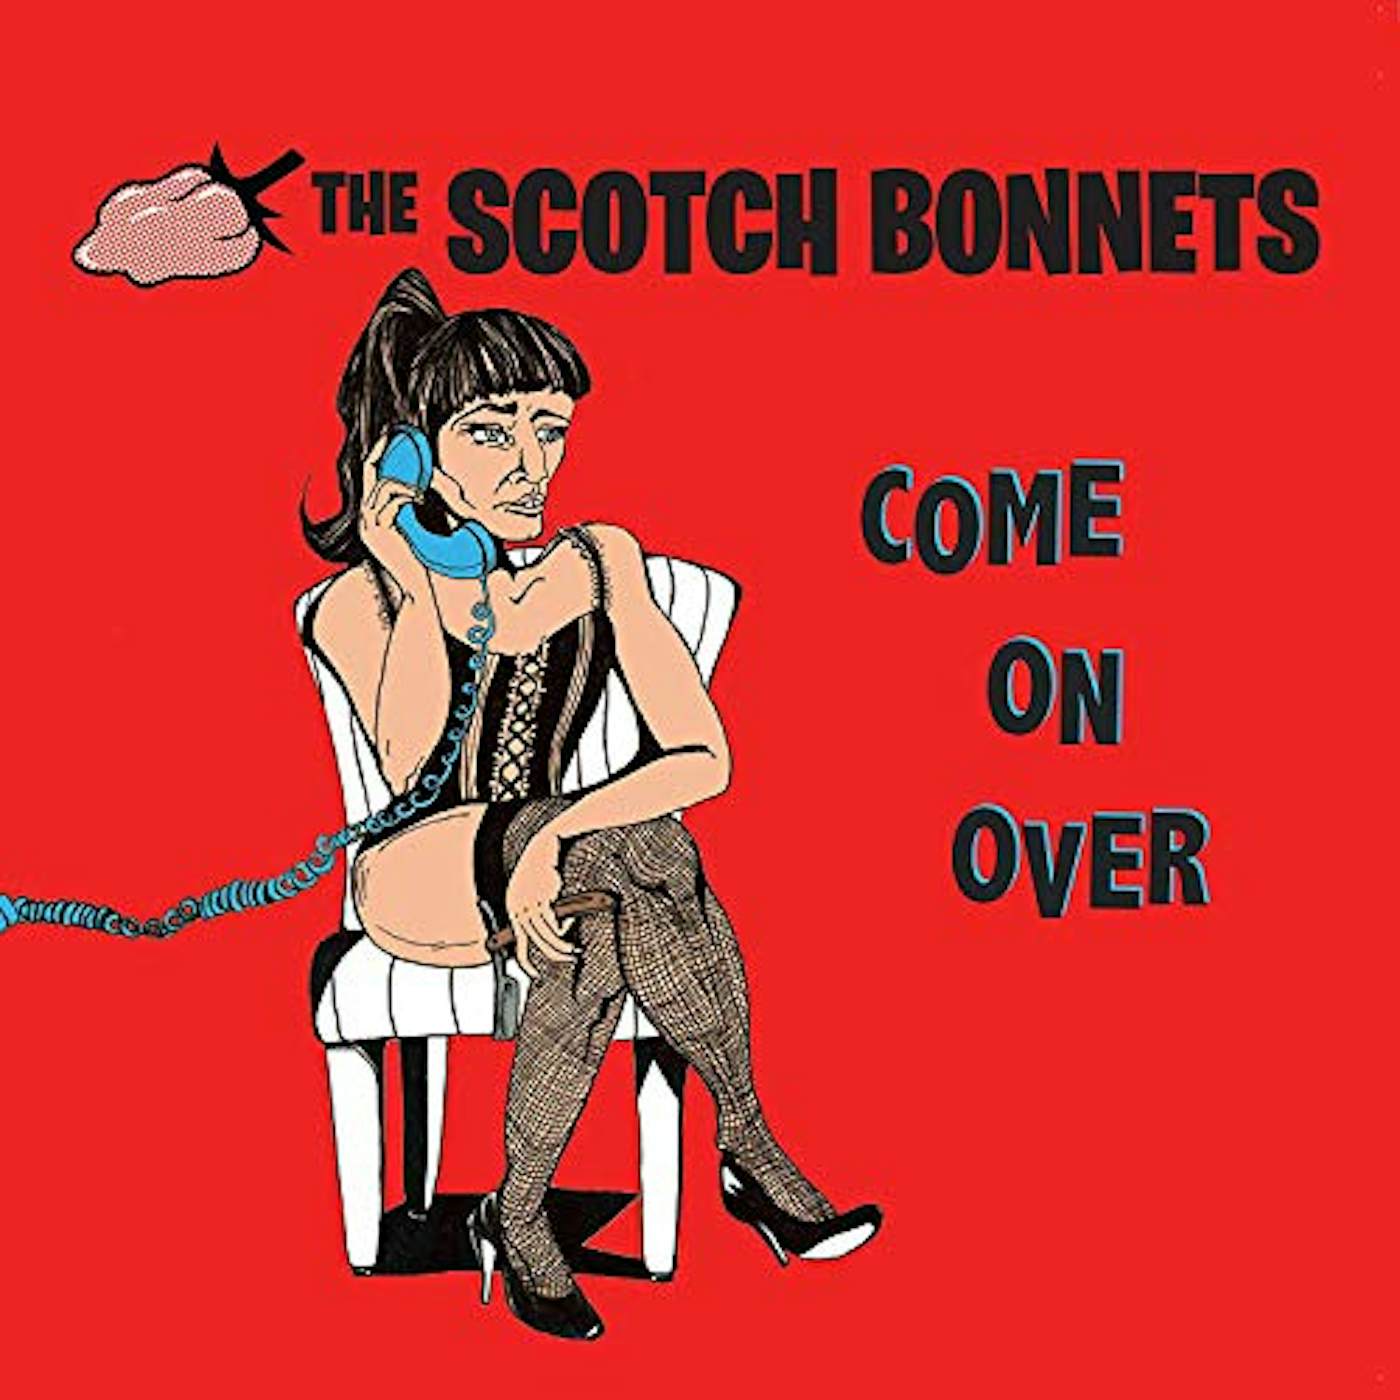 The Scotch Bonnets Come on Over Vinyl Record